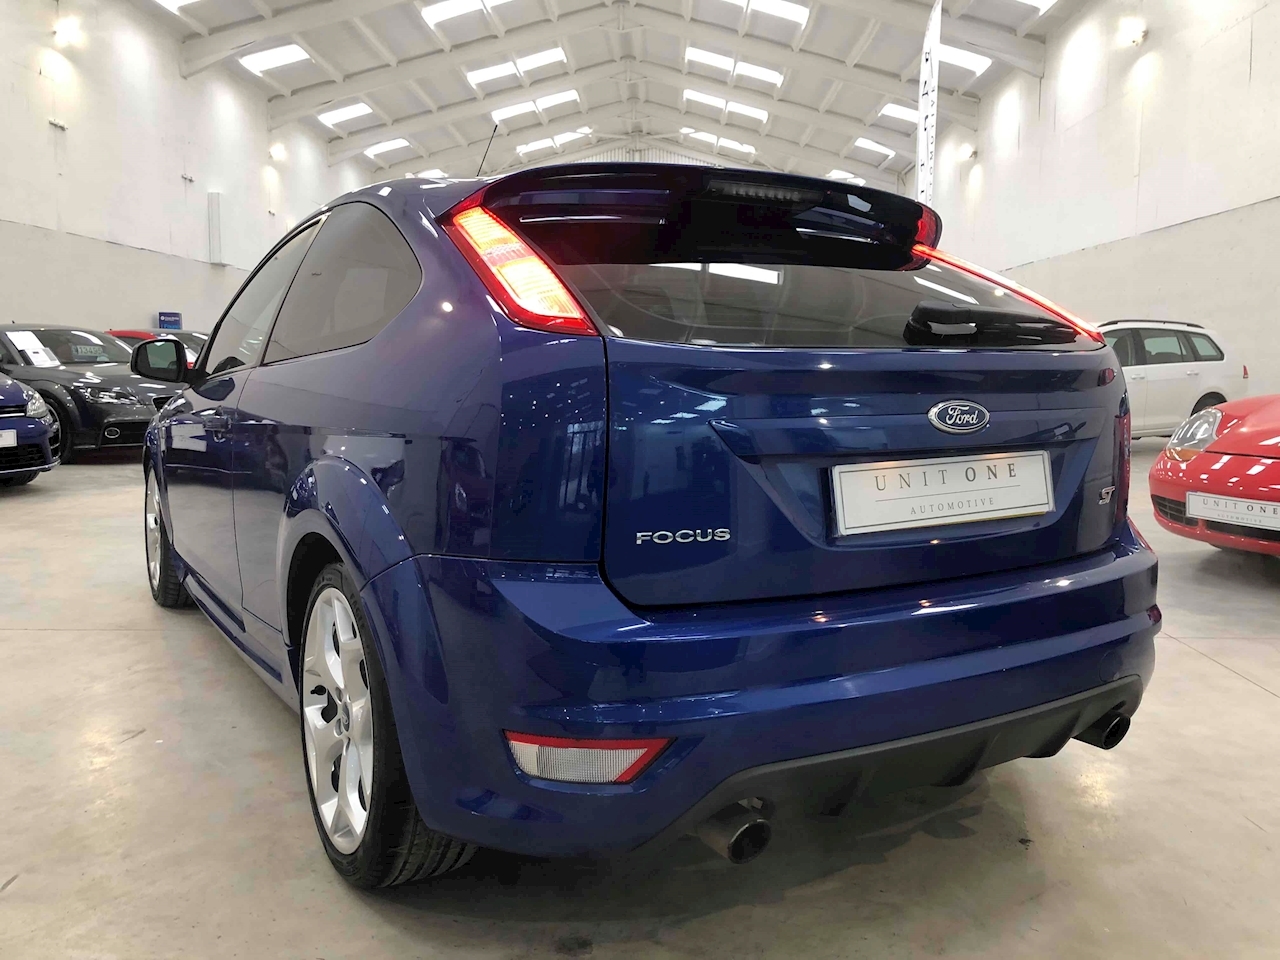 Used 2008 Ford Focus St2 Hatchback 2.5 Manual Petrol For